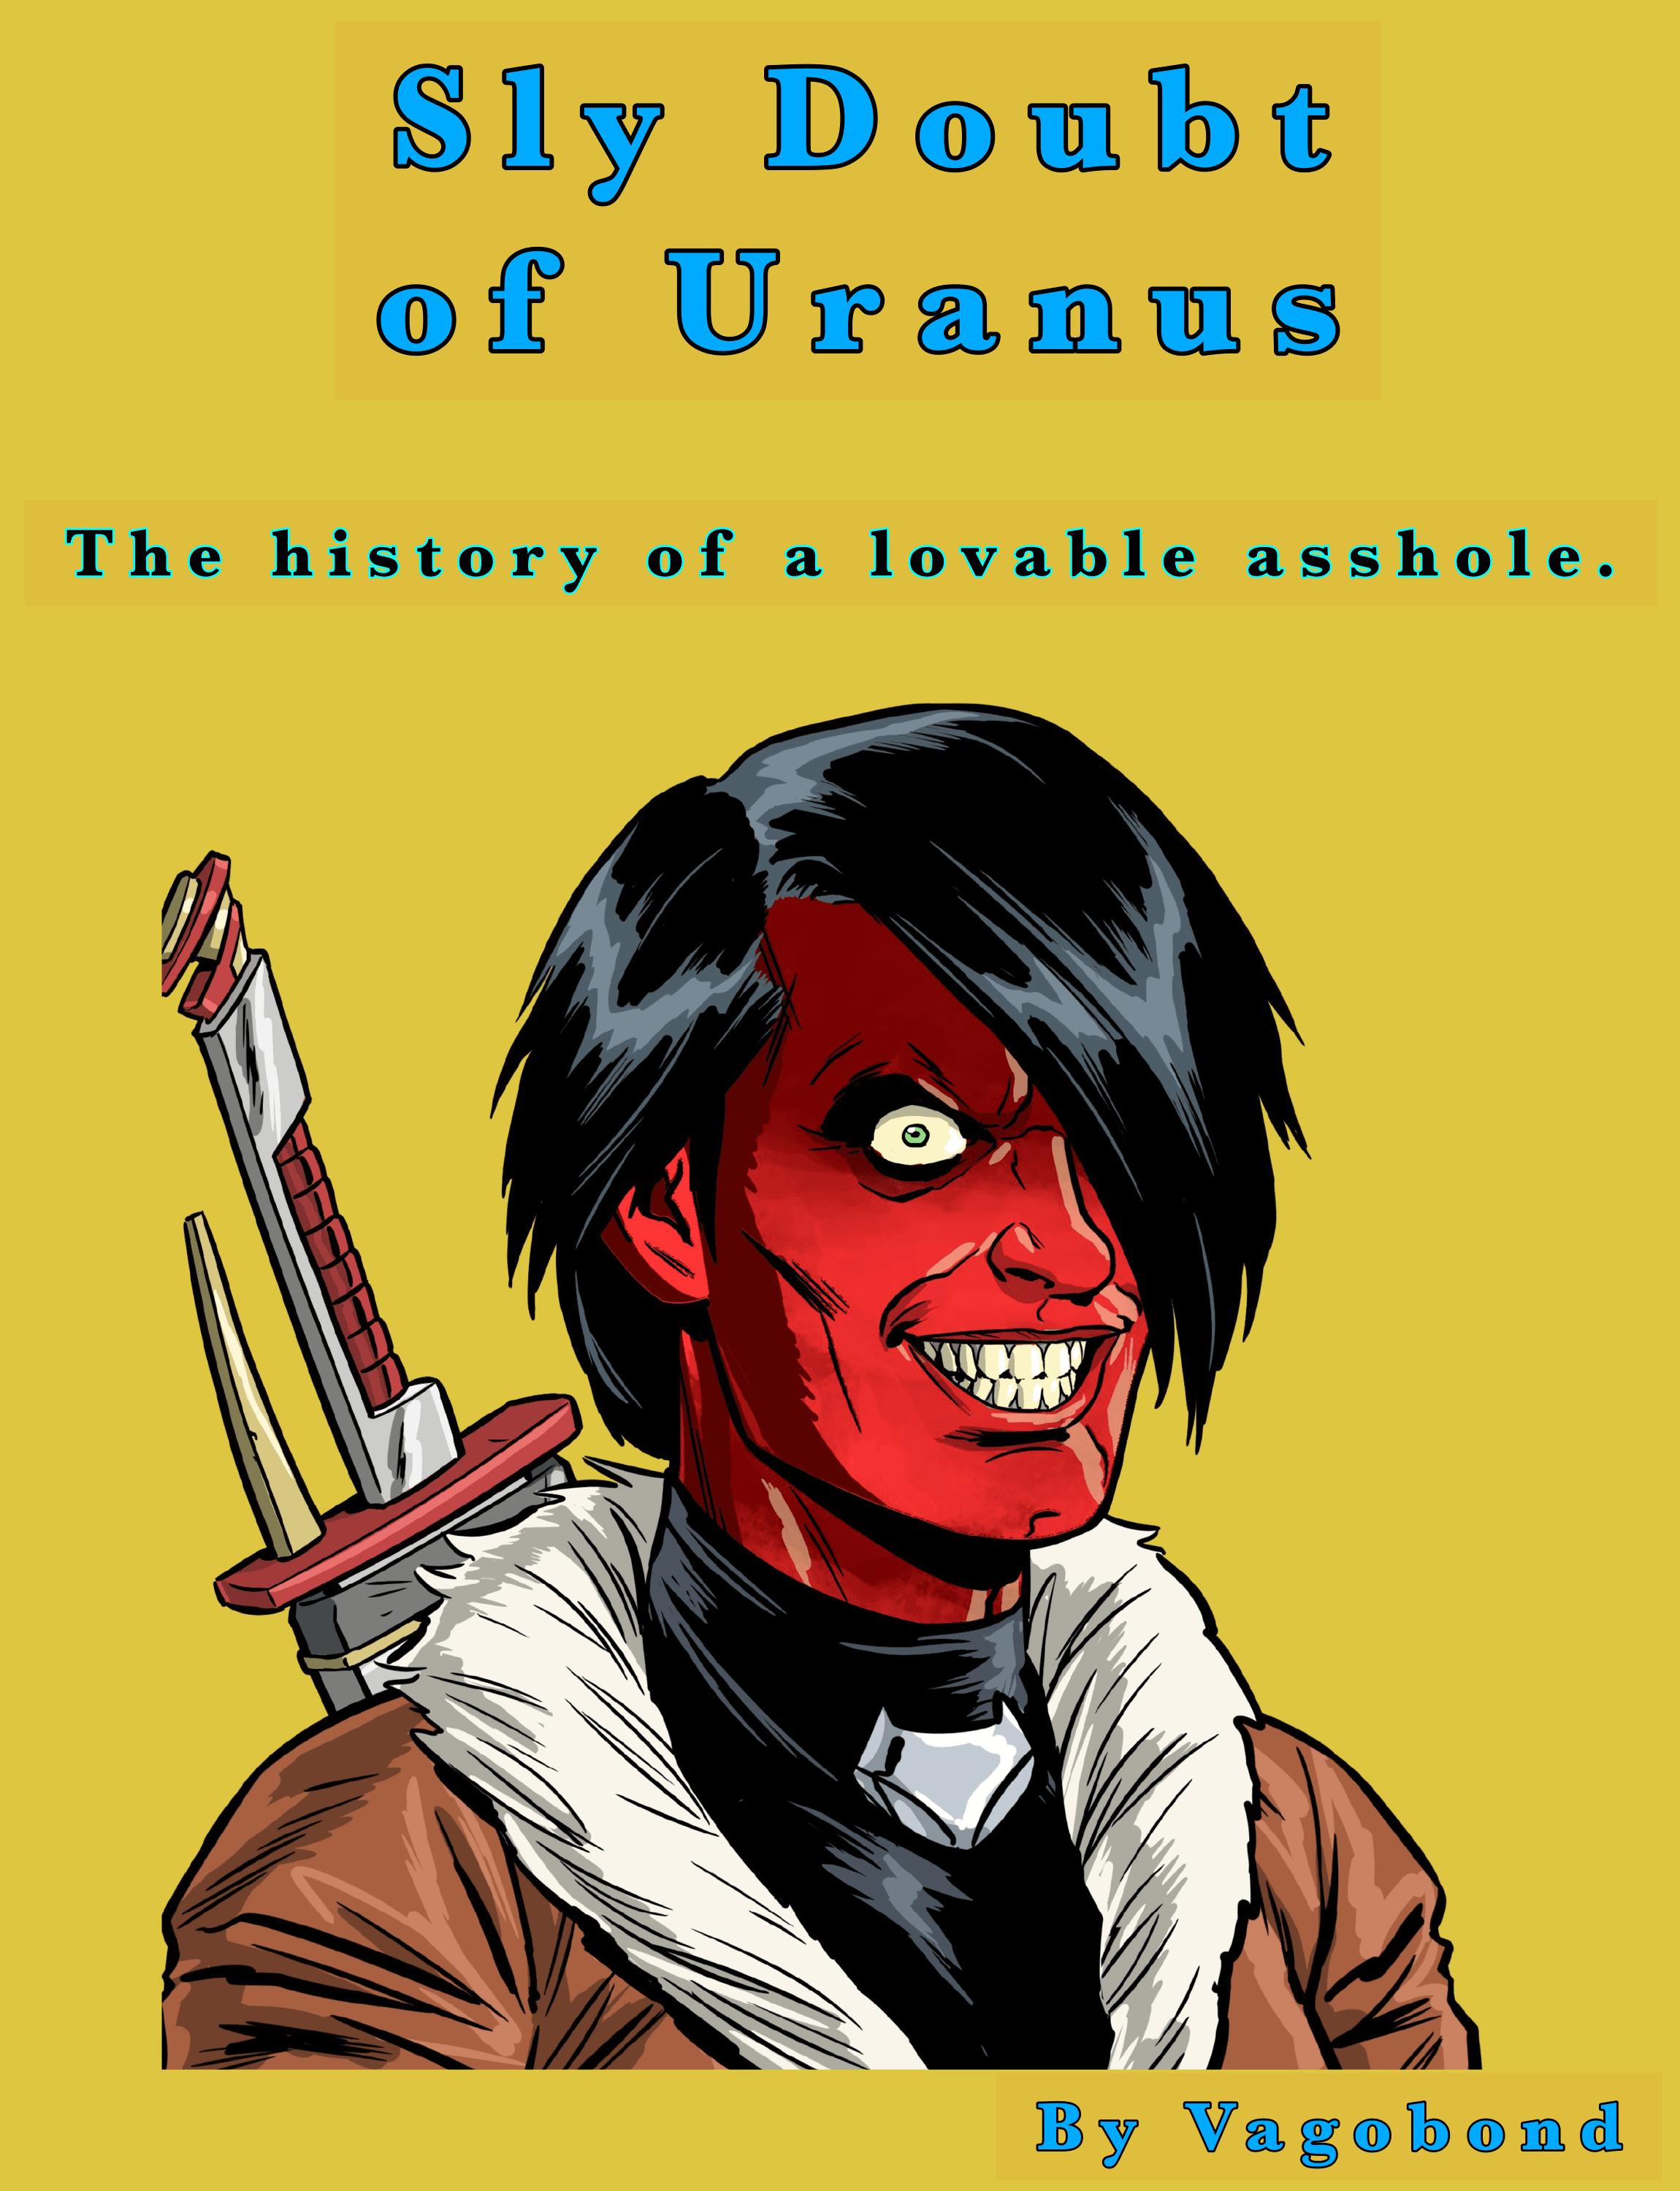 Sly Doubt of Uranus: The History of a Lovable Asshole - Chapter 1: 1st Edition